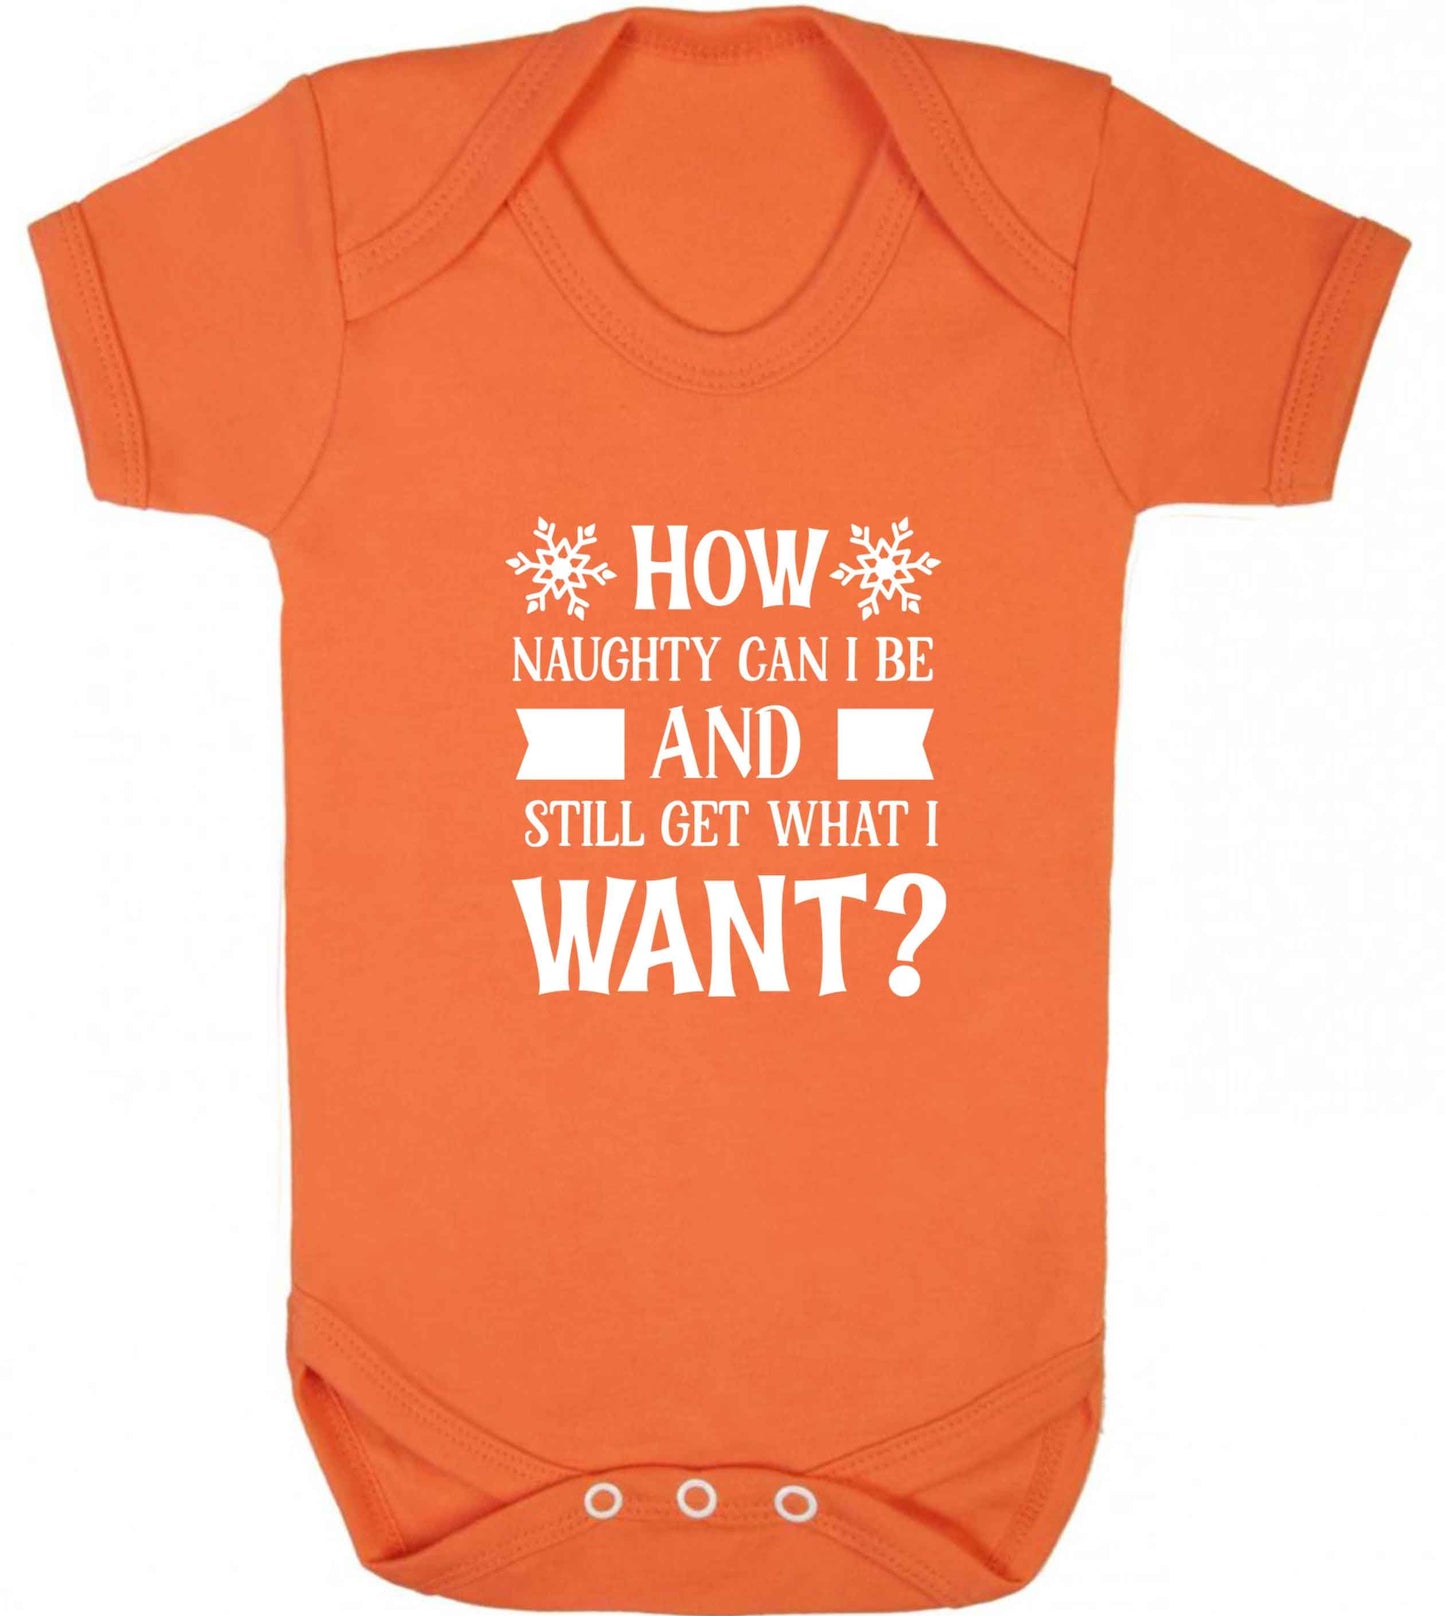 How naughty can I be and still get what I want? baby vest orange 18-24 months